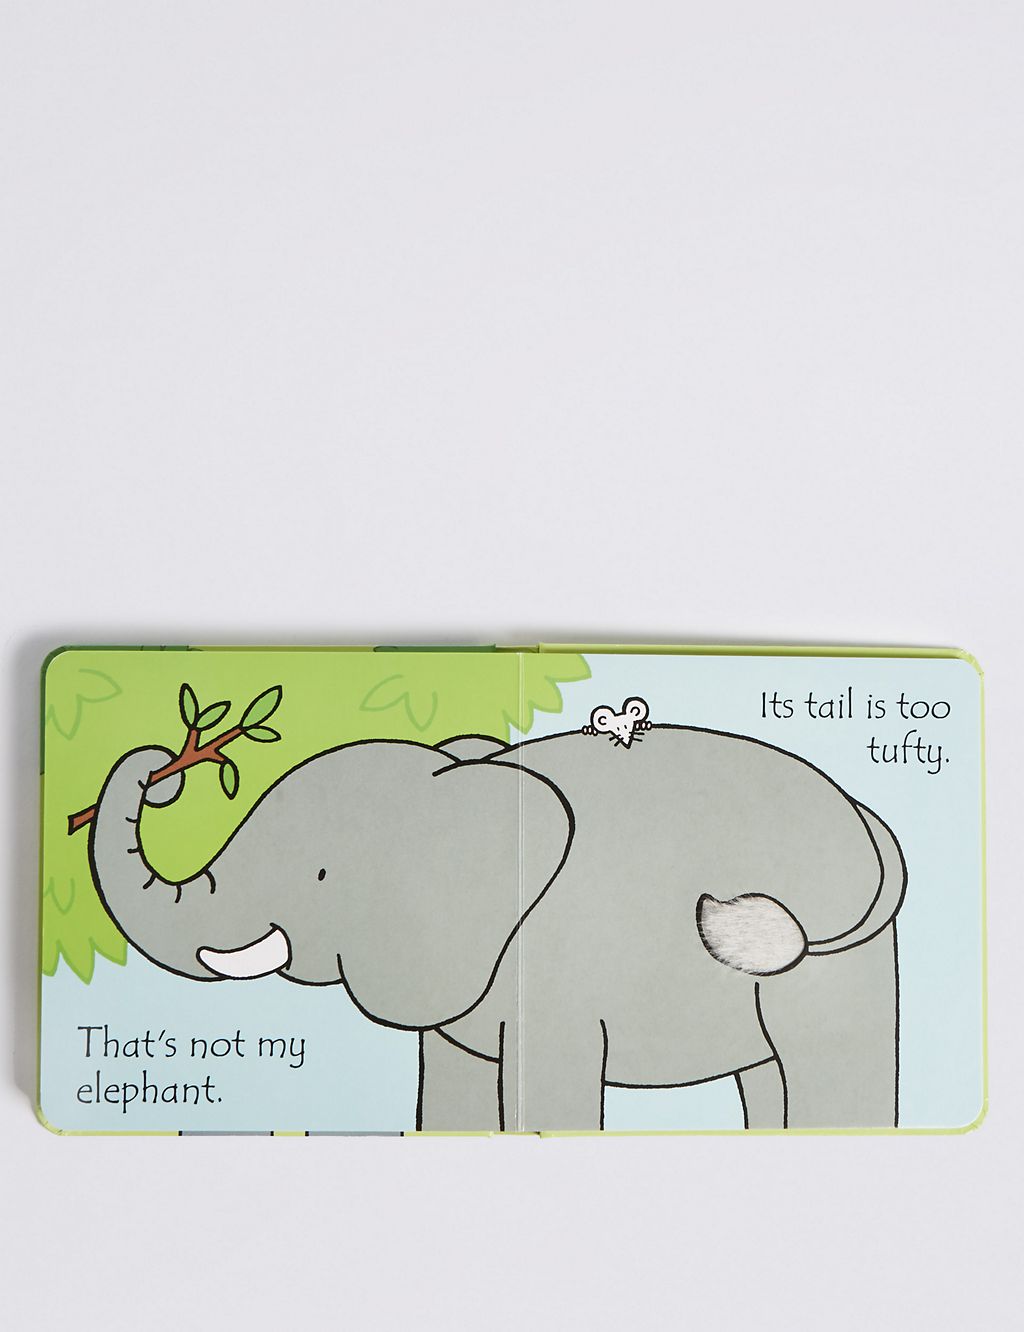 That's Not My Elephant Book 2 of 3